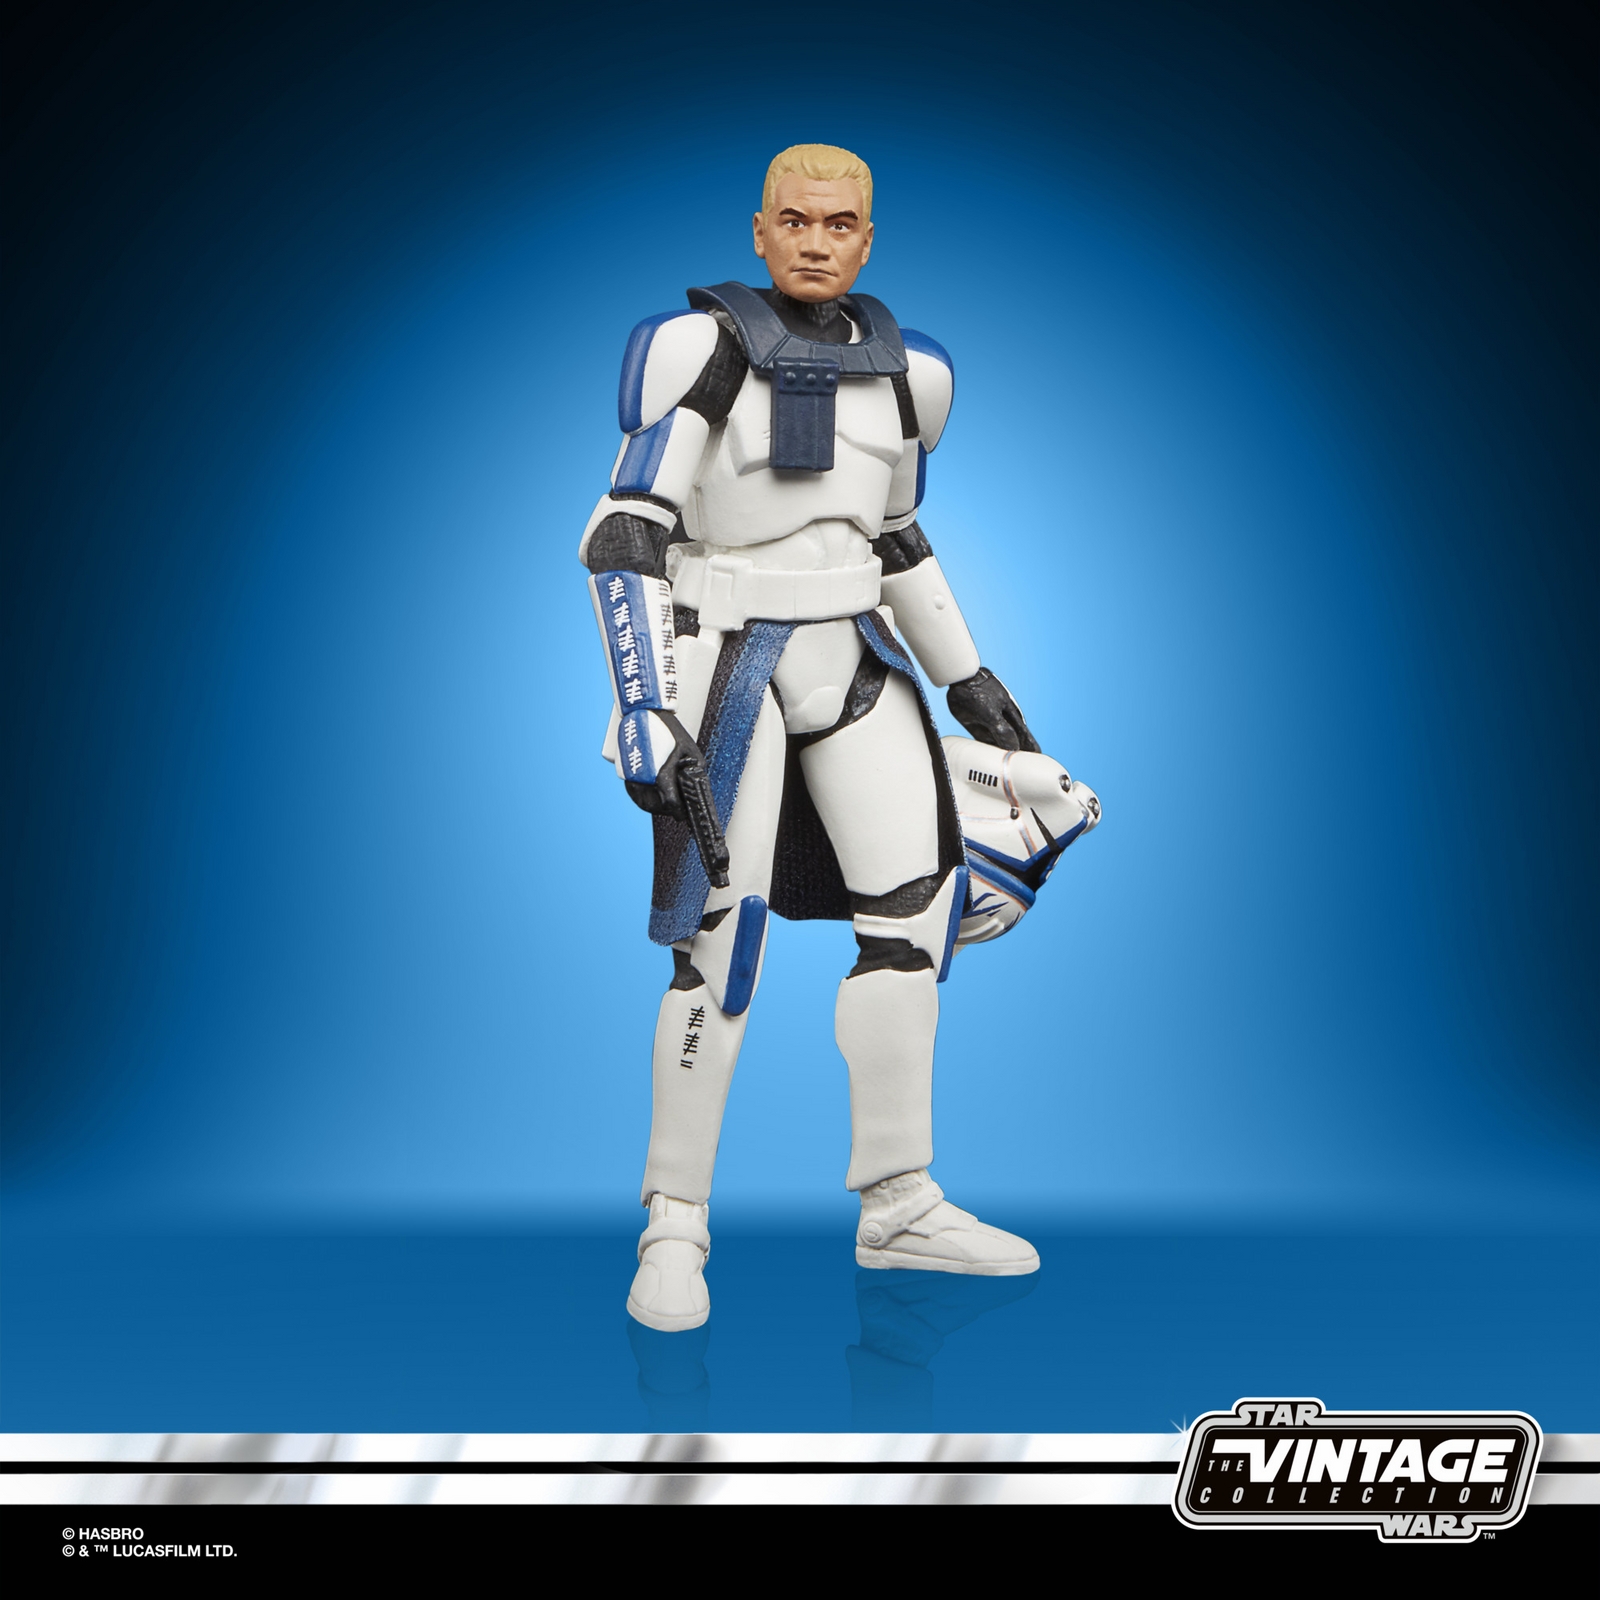 STAR WARS THE VINTAGE COLLECTION STAR WARS THE BAD BATCH Figure 4-Pack - CLONE CAPTAIN REX (3).jpg